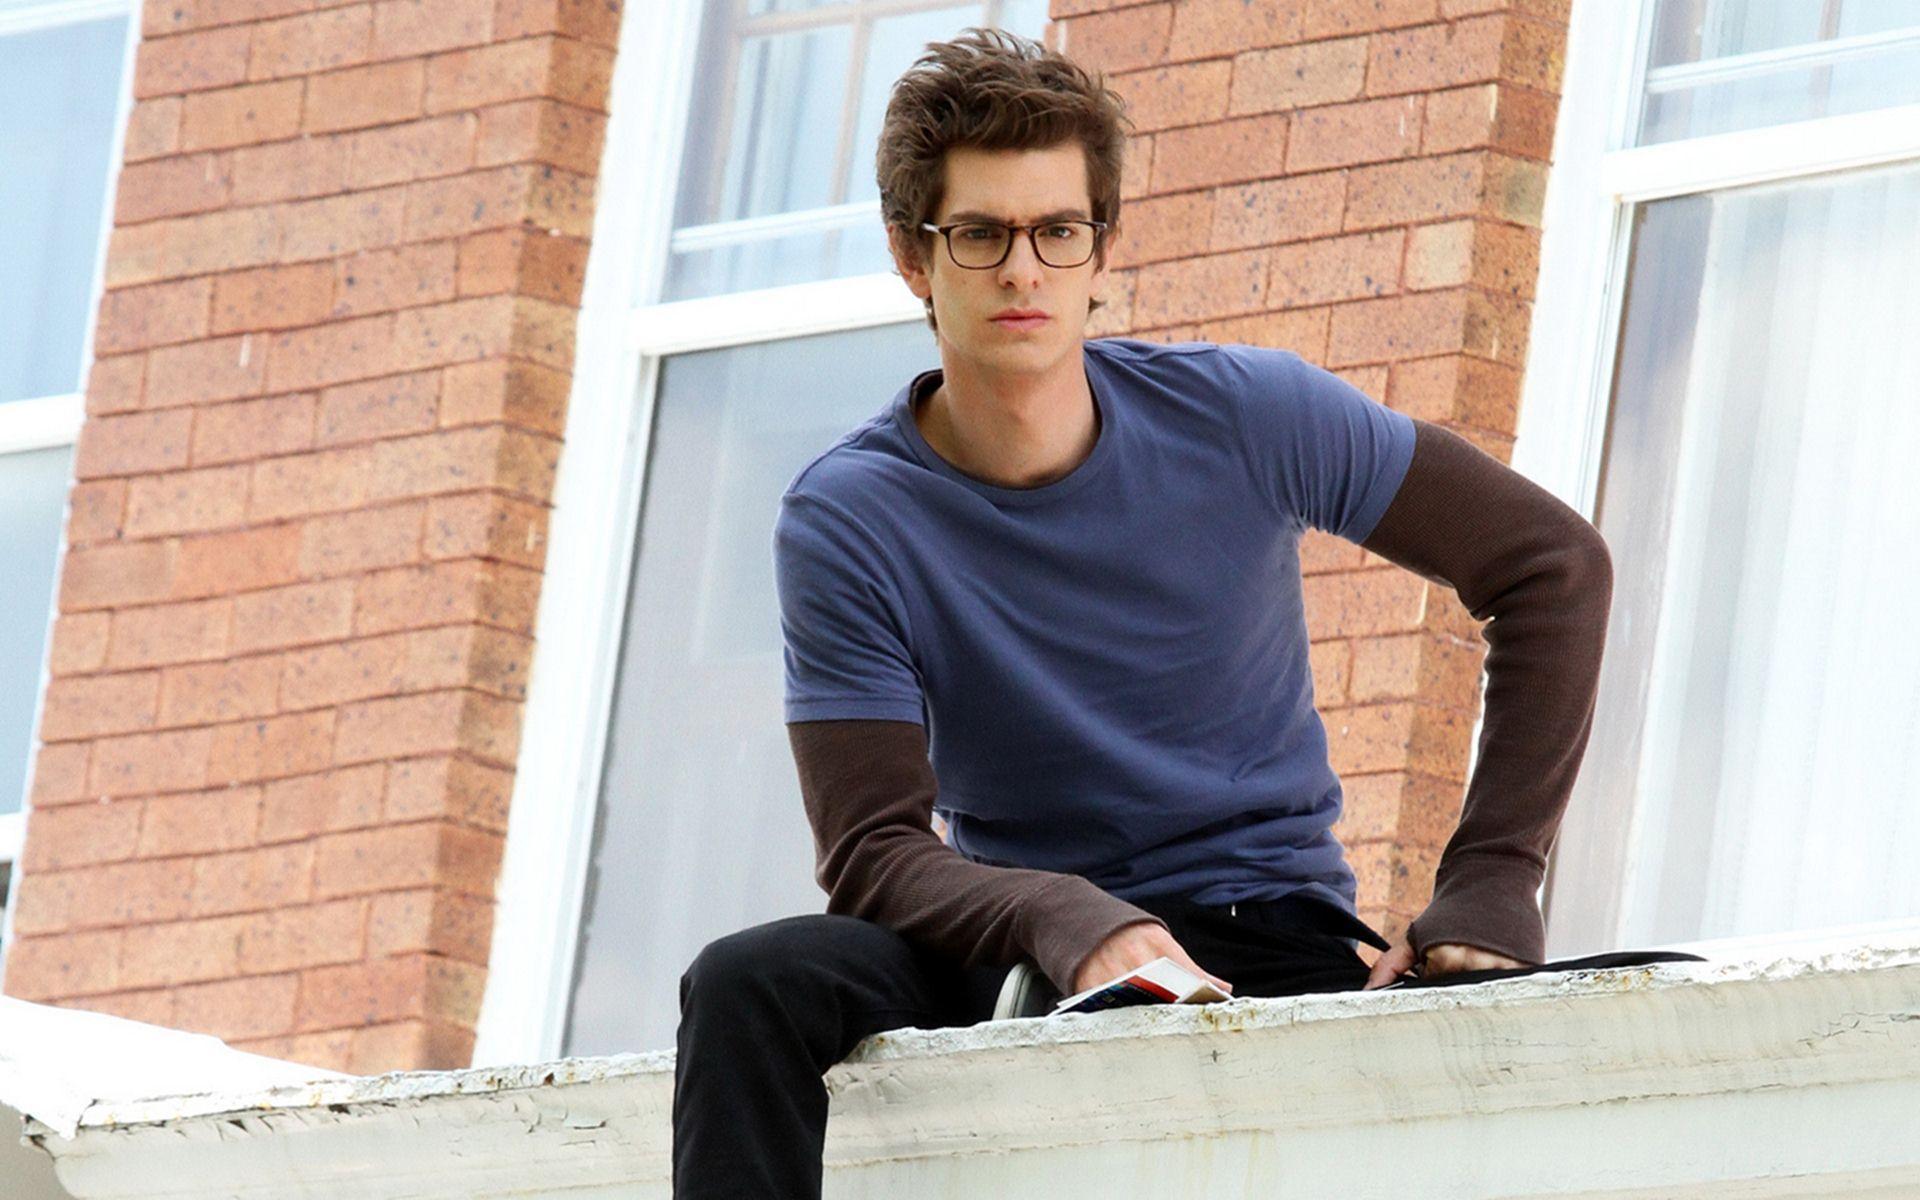 Andrew Garfield as Peter Parker in The Amazing Spider-Man. The young actor is sitting on a ledge in front of a brick building. - Andrew Garfield